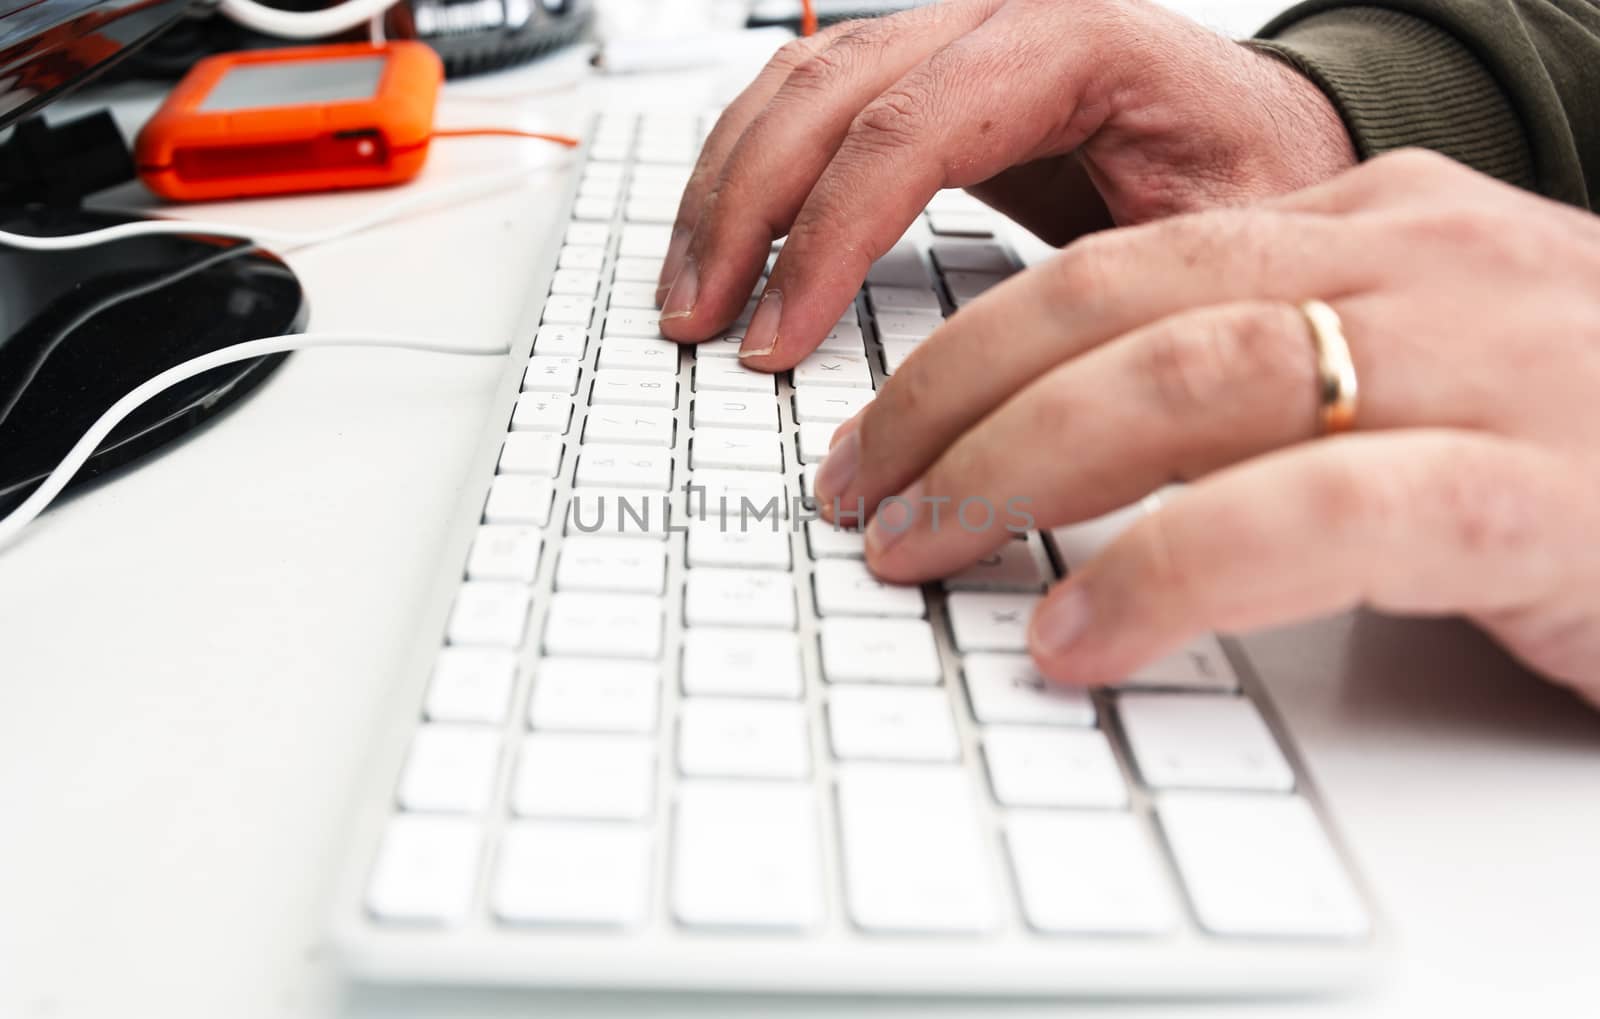 male hands typing keys on a white computer keyboard in an office. Technology and work.